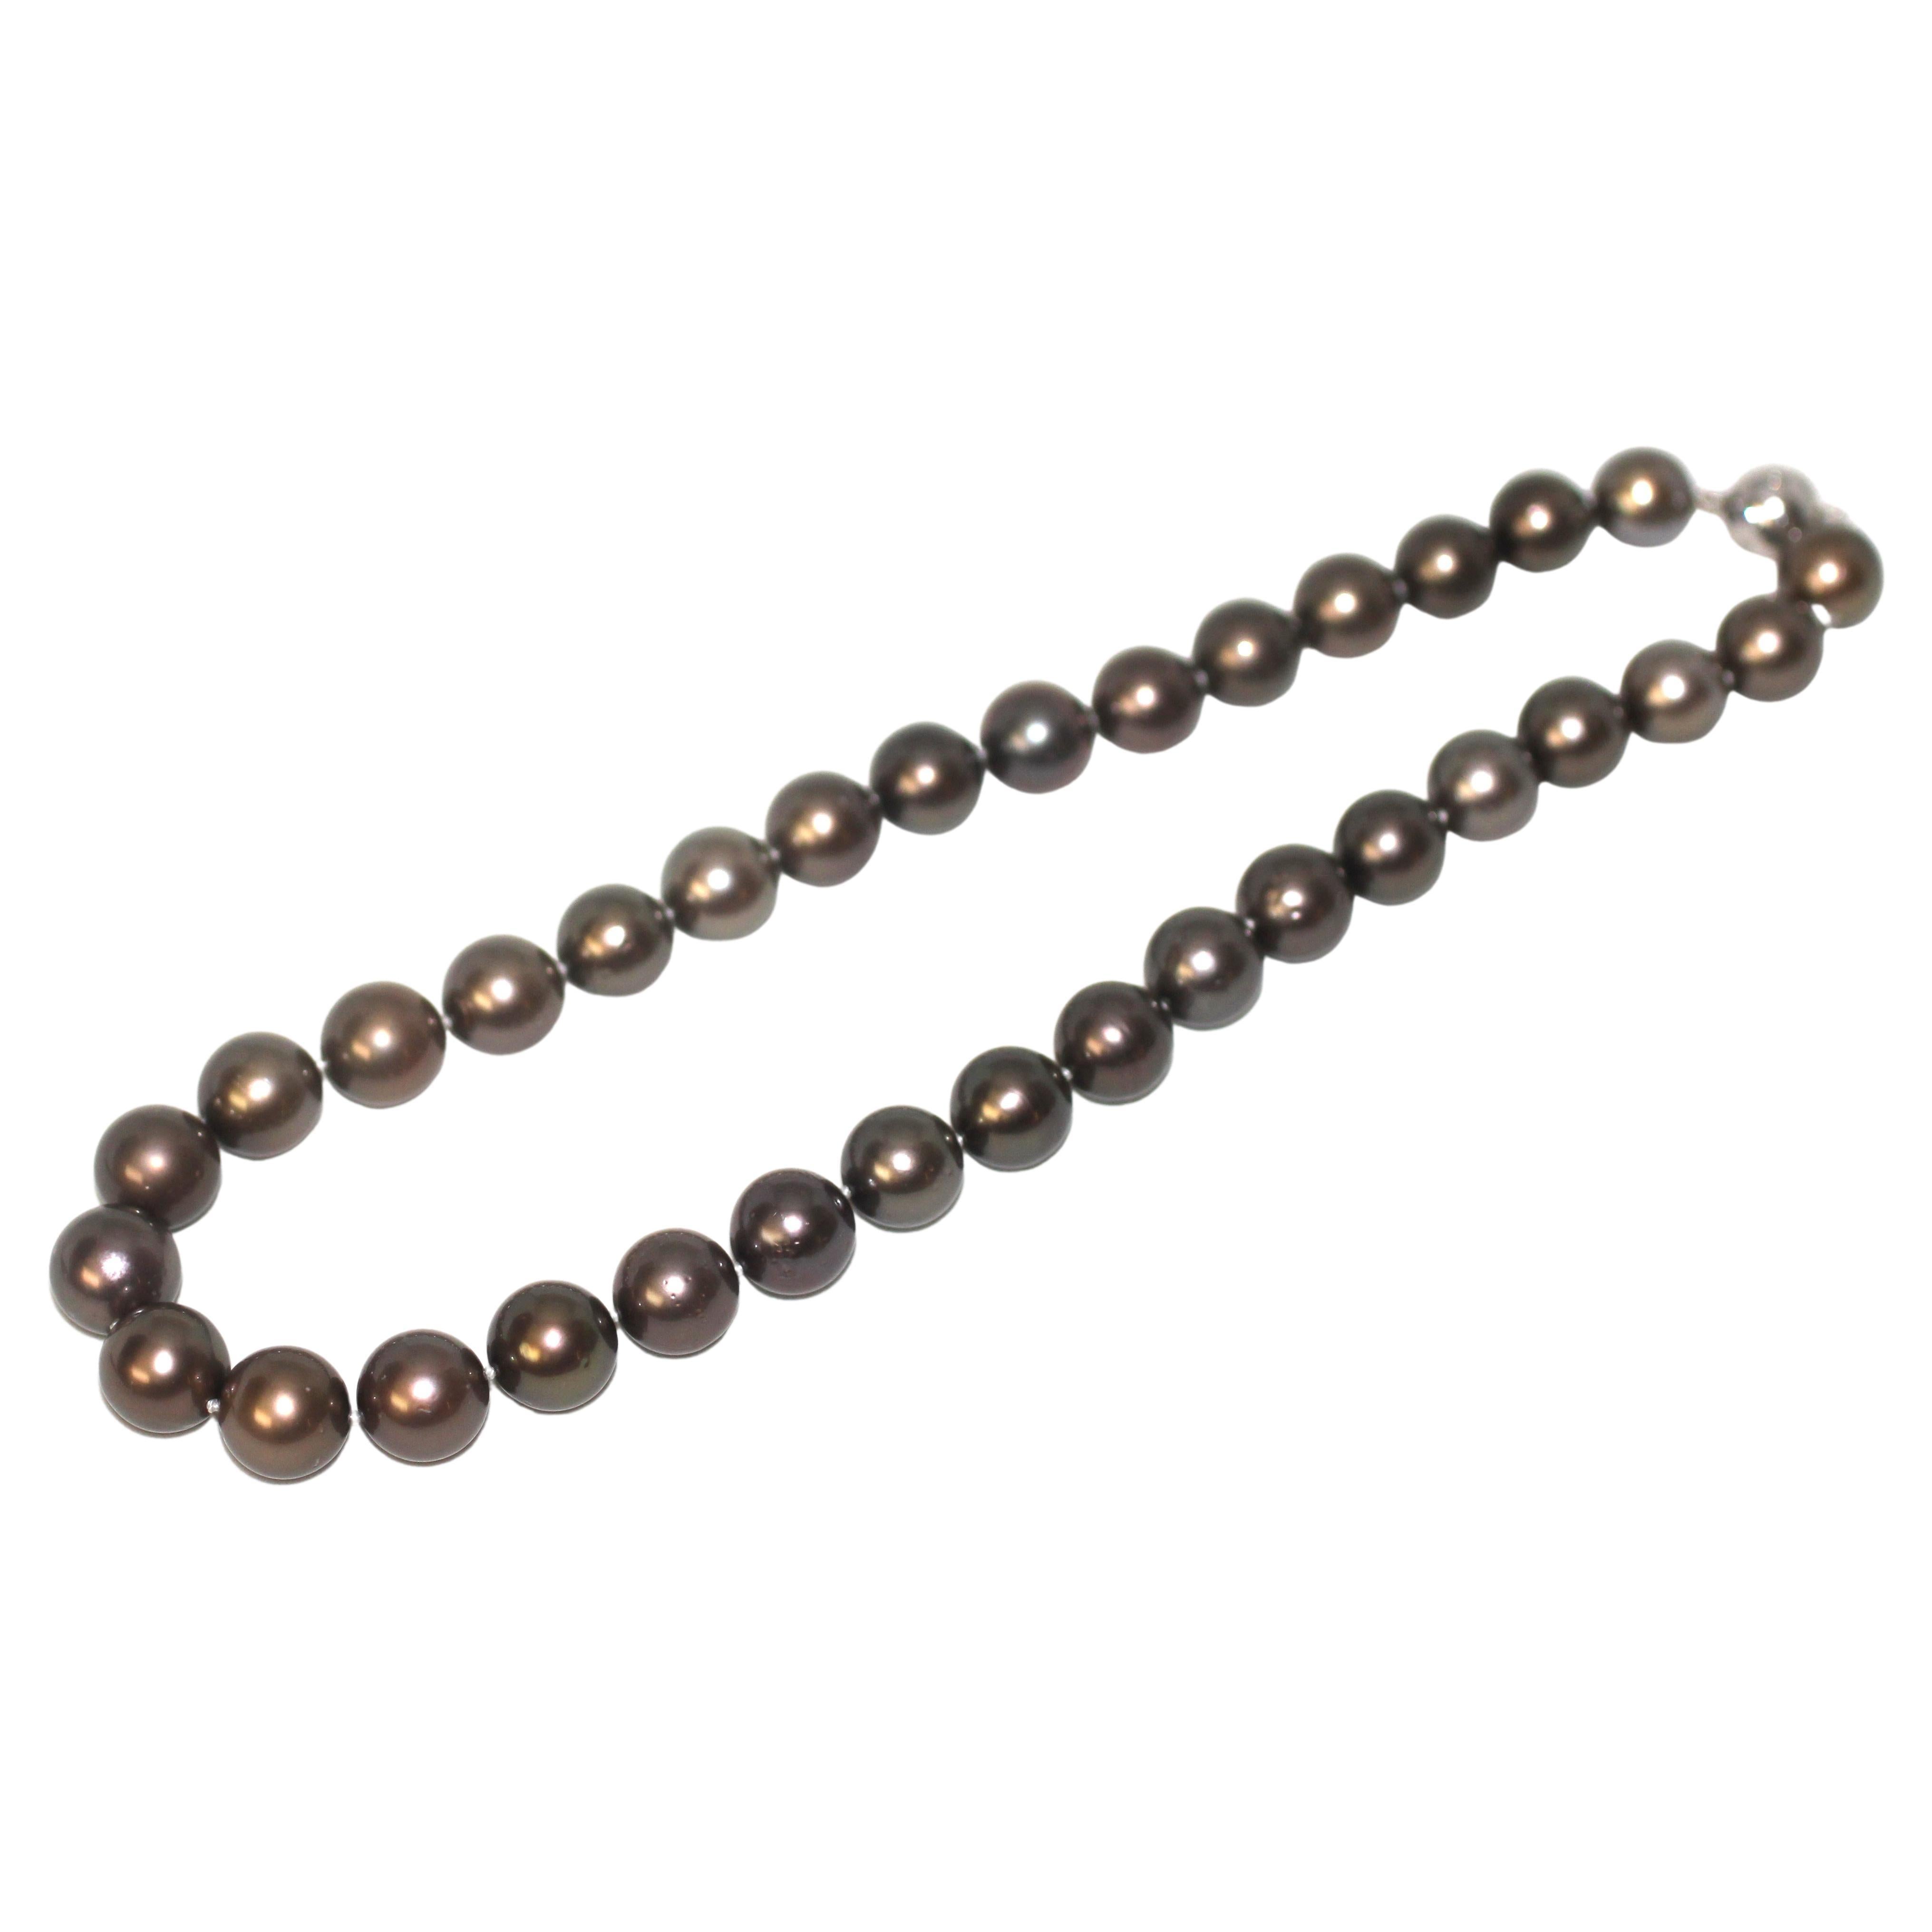 Bead Hakimoto 11X12mTahitian South Sea Natural Brown Pearl Necklace 18K Diamond Clasp For Sale